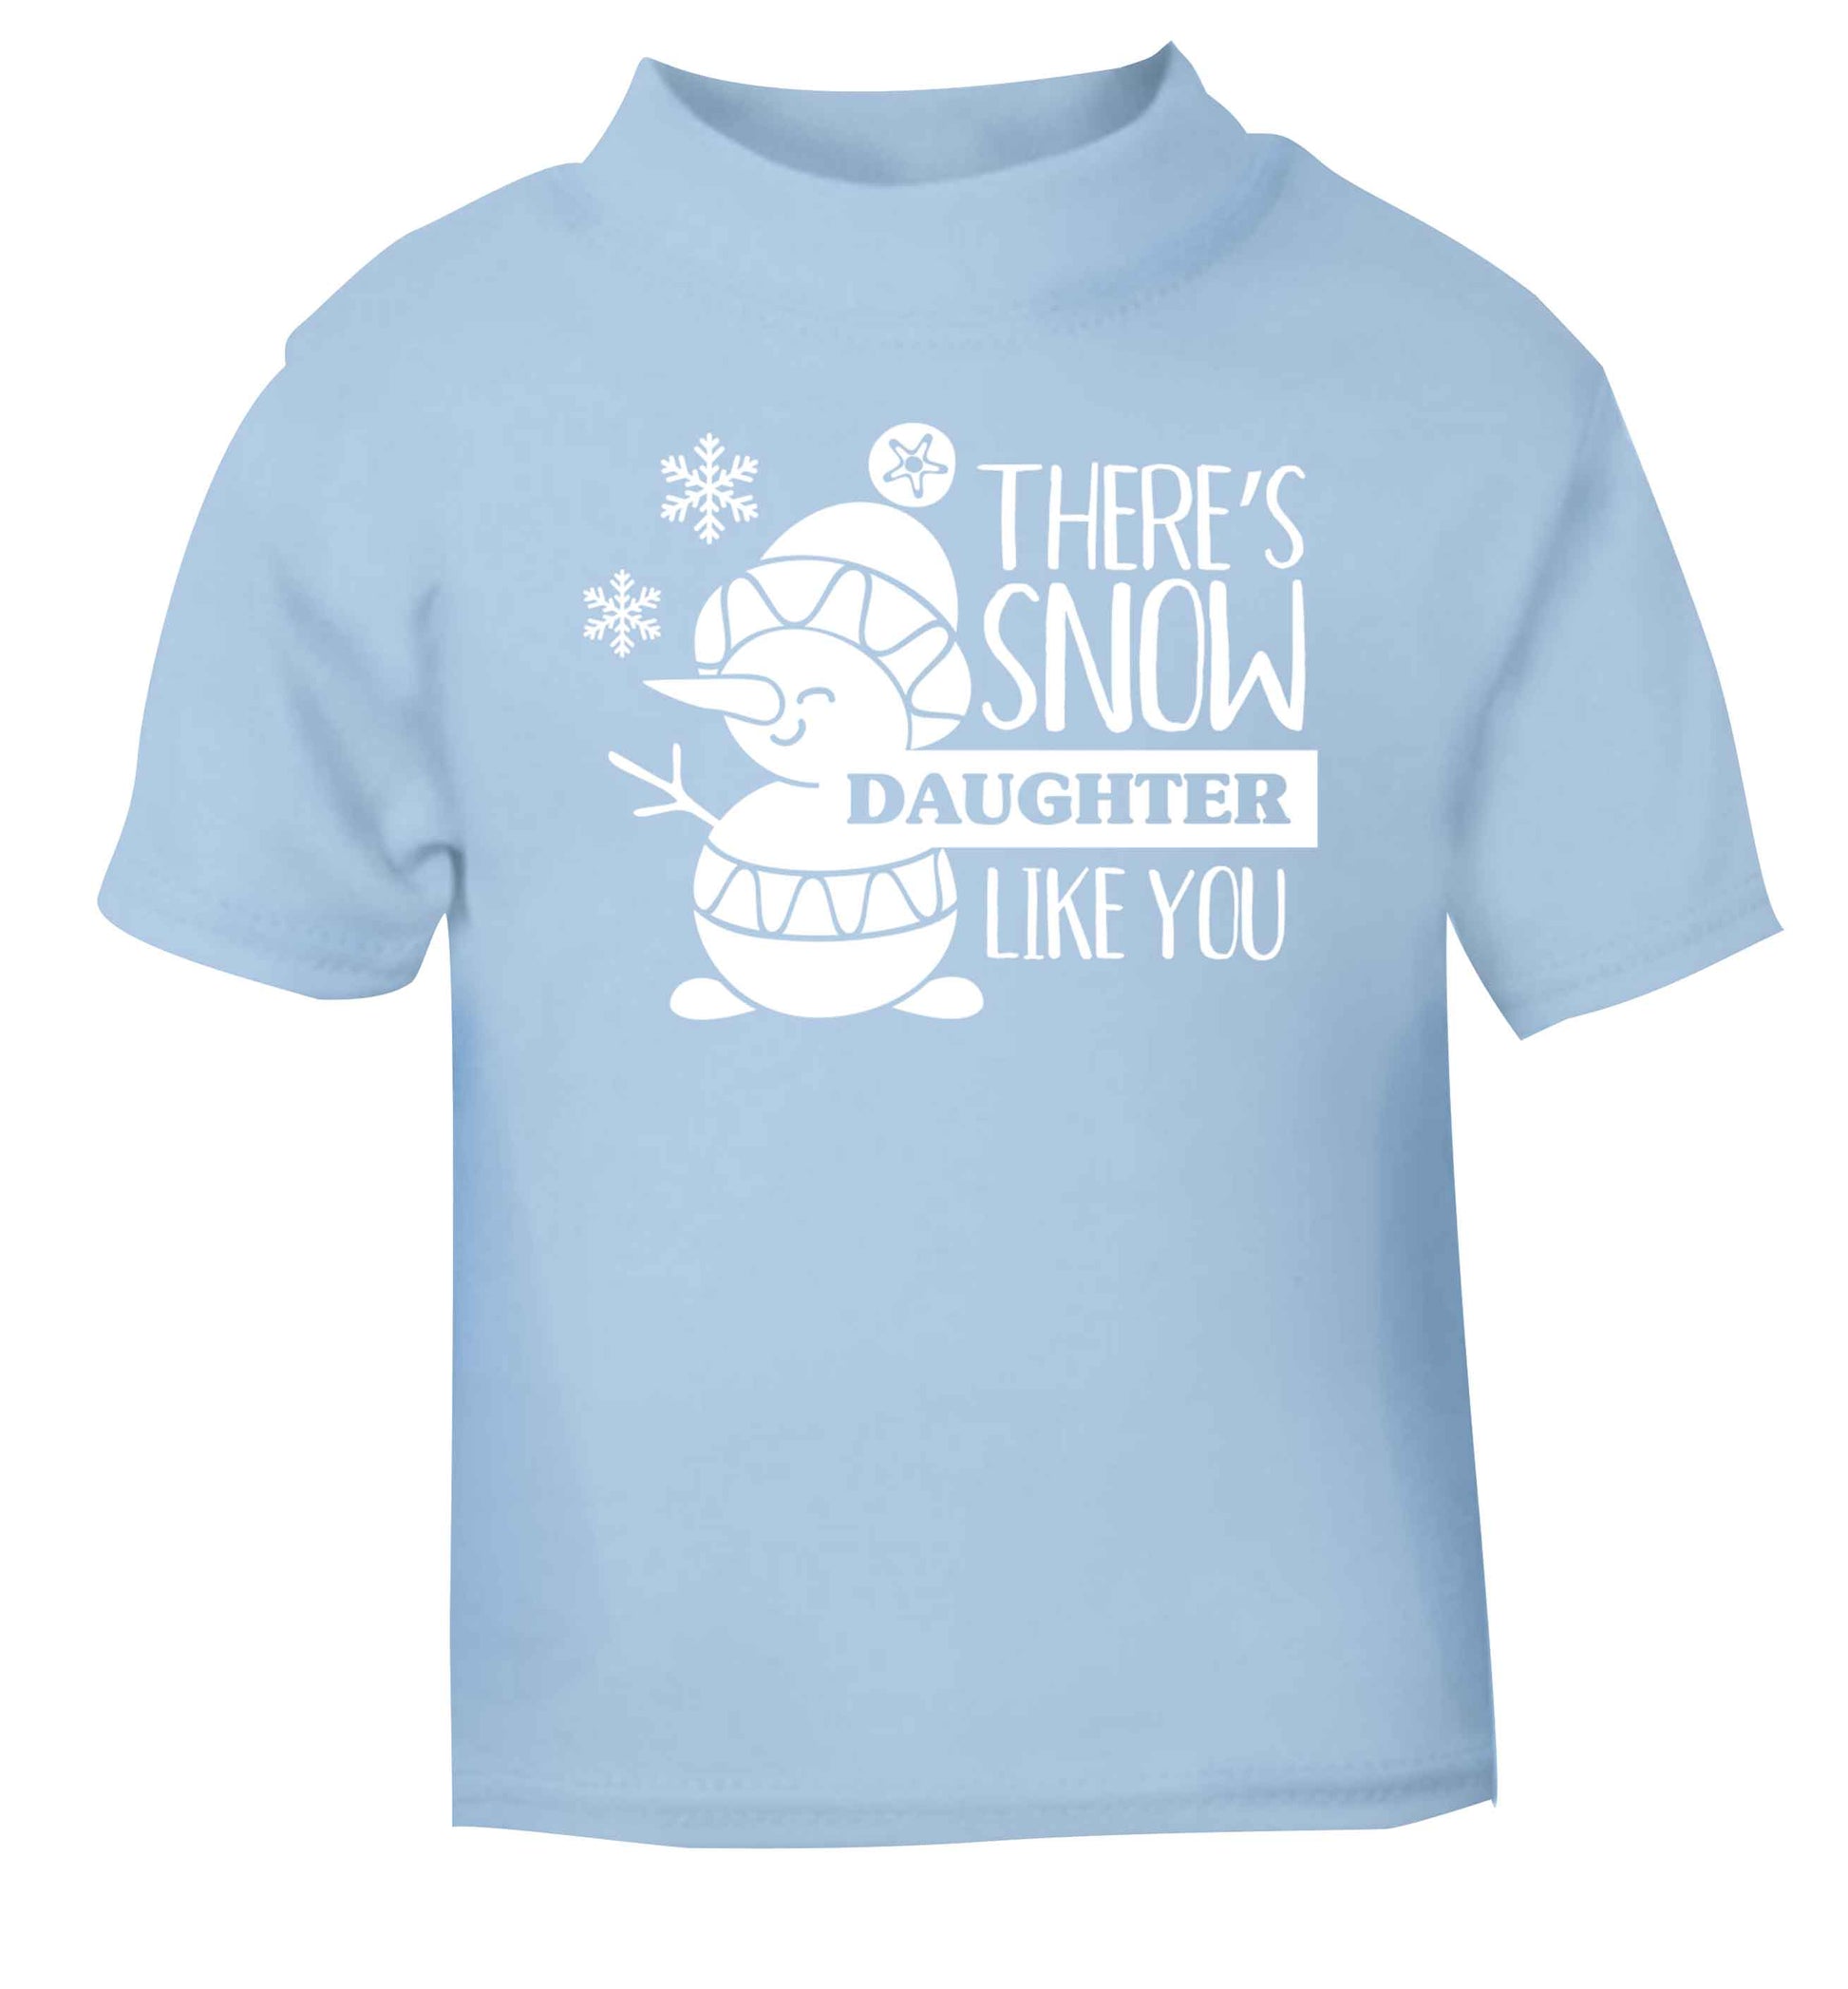 There's snow daughter like you light blue baby toddler Tshirt 2 Years